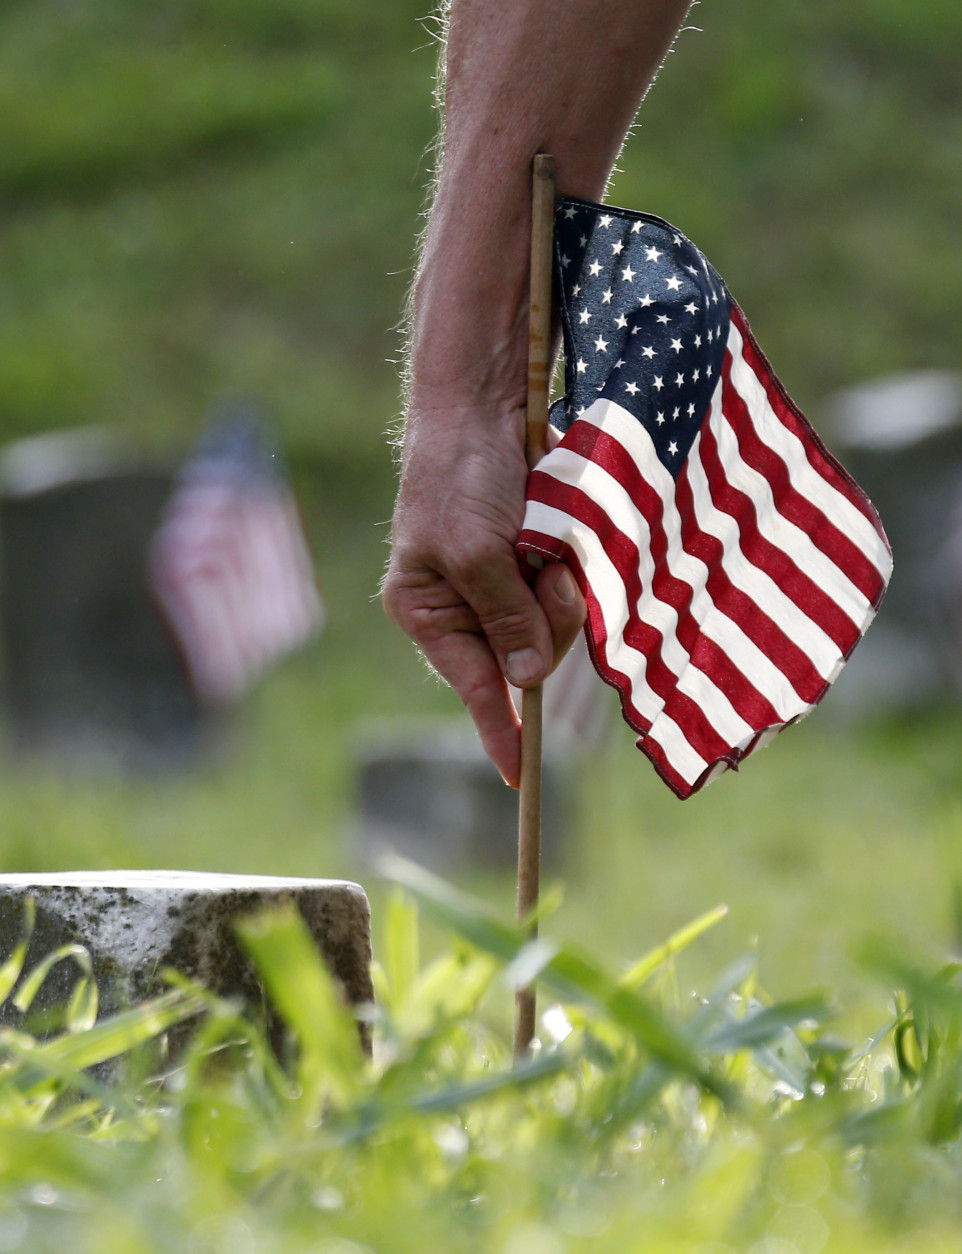 A volunteer plants an American flag, one of about 18,000, on the graves of American servicemen in the Vicksburg National Cemetery in Vicksburg, Miss., Friday, May 27, 2016, in advance of the Memorial Day weekend. Memorial Day is the only holiday the flags are placed on the graves, which include among others, 17,000 Civil War Union troops, two Confederate soldiers and a member of the Royal Australian Air Force. (AP Photo/Rogelio V. Solis)